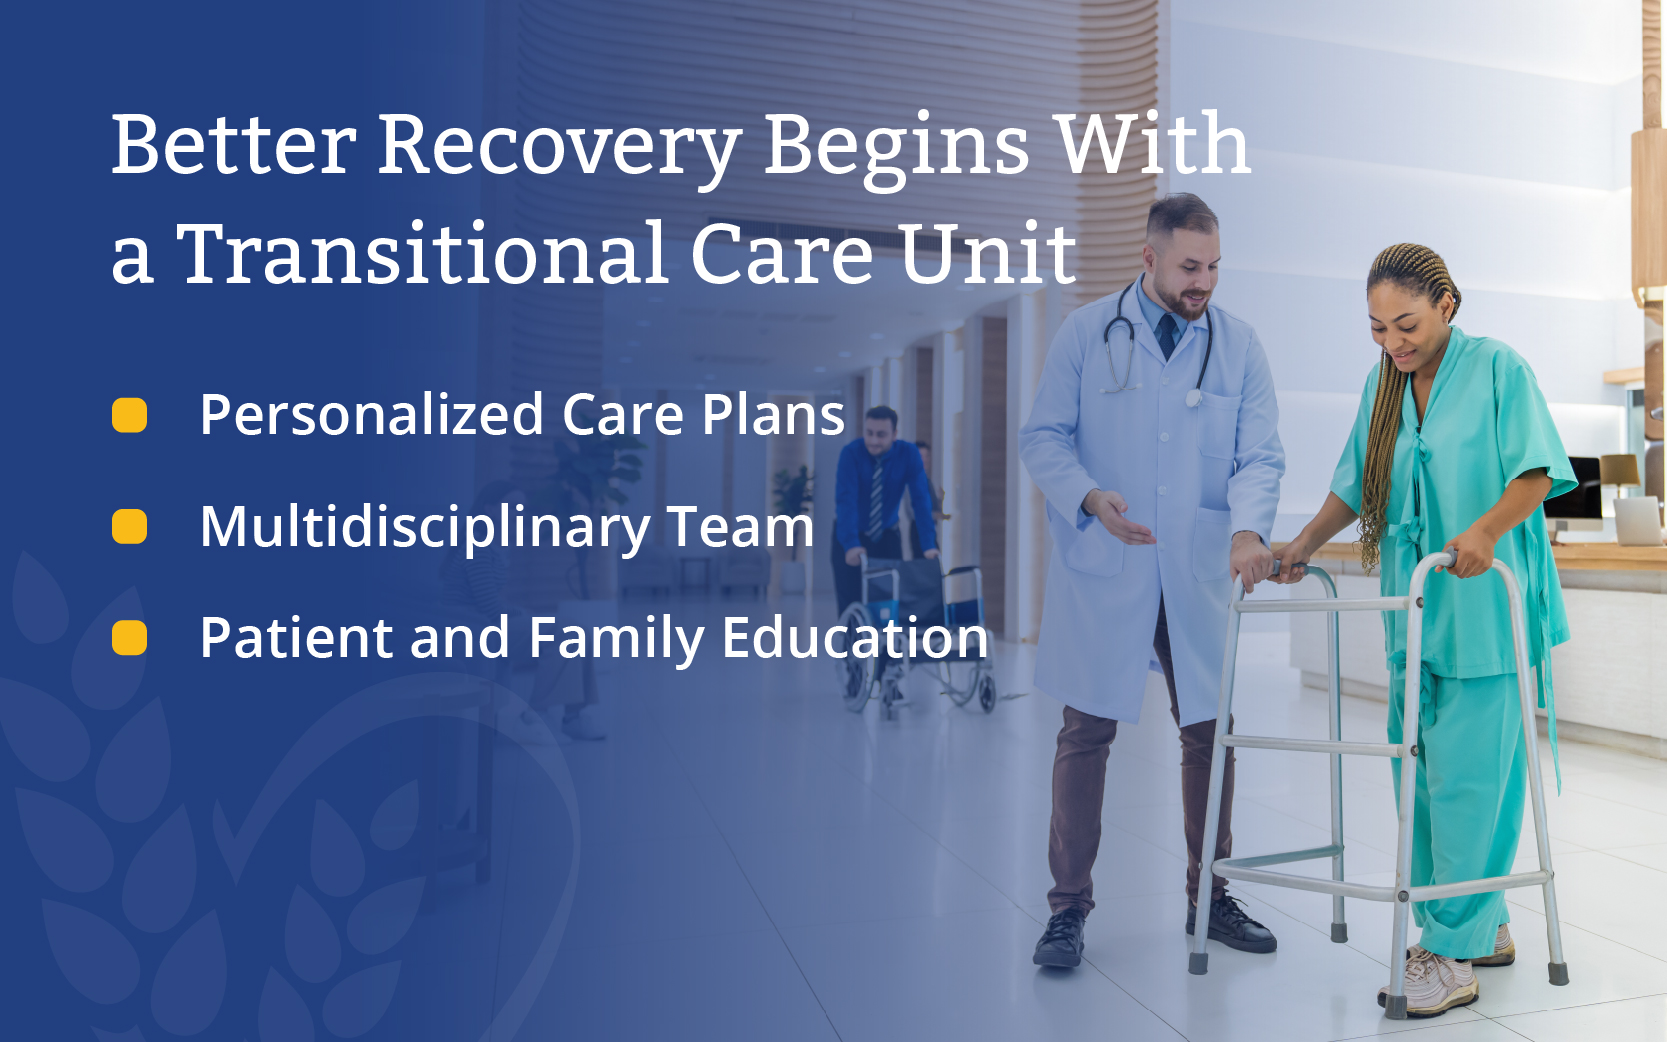 Better recovery begins with transitional care